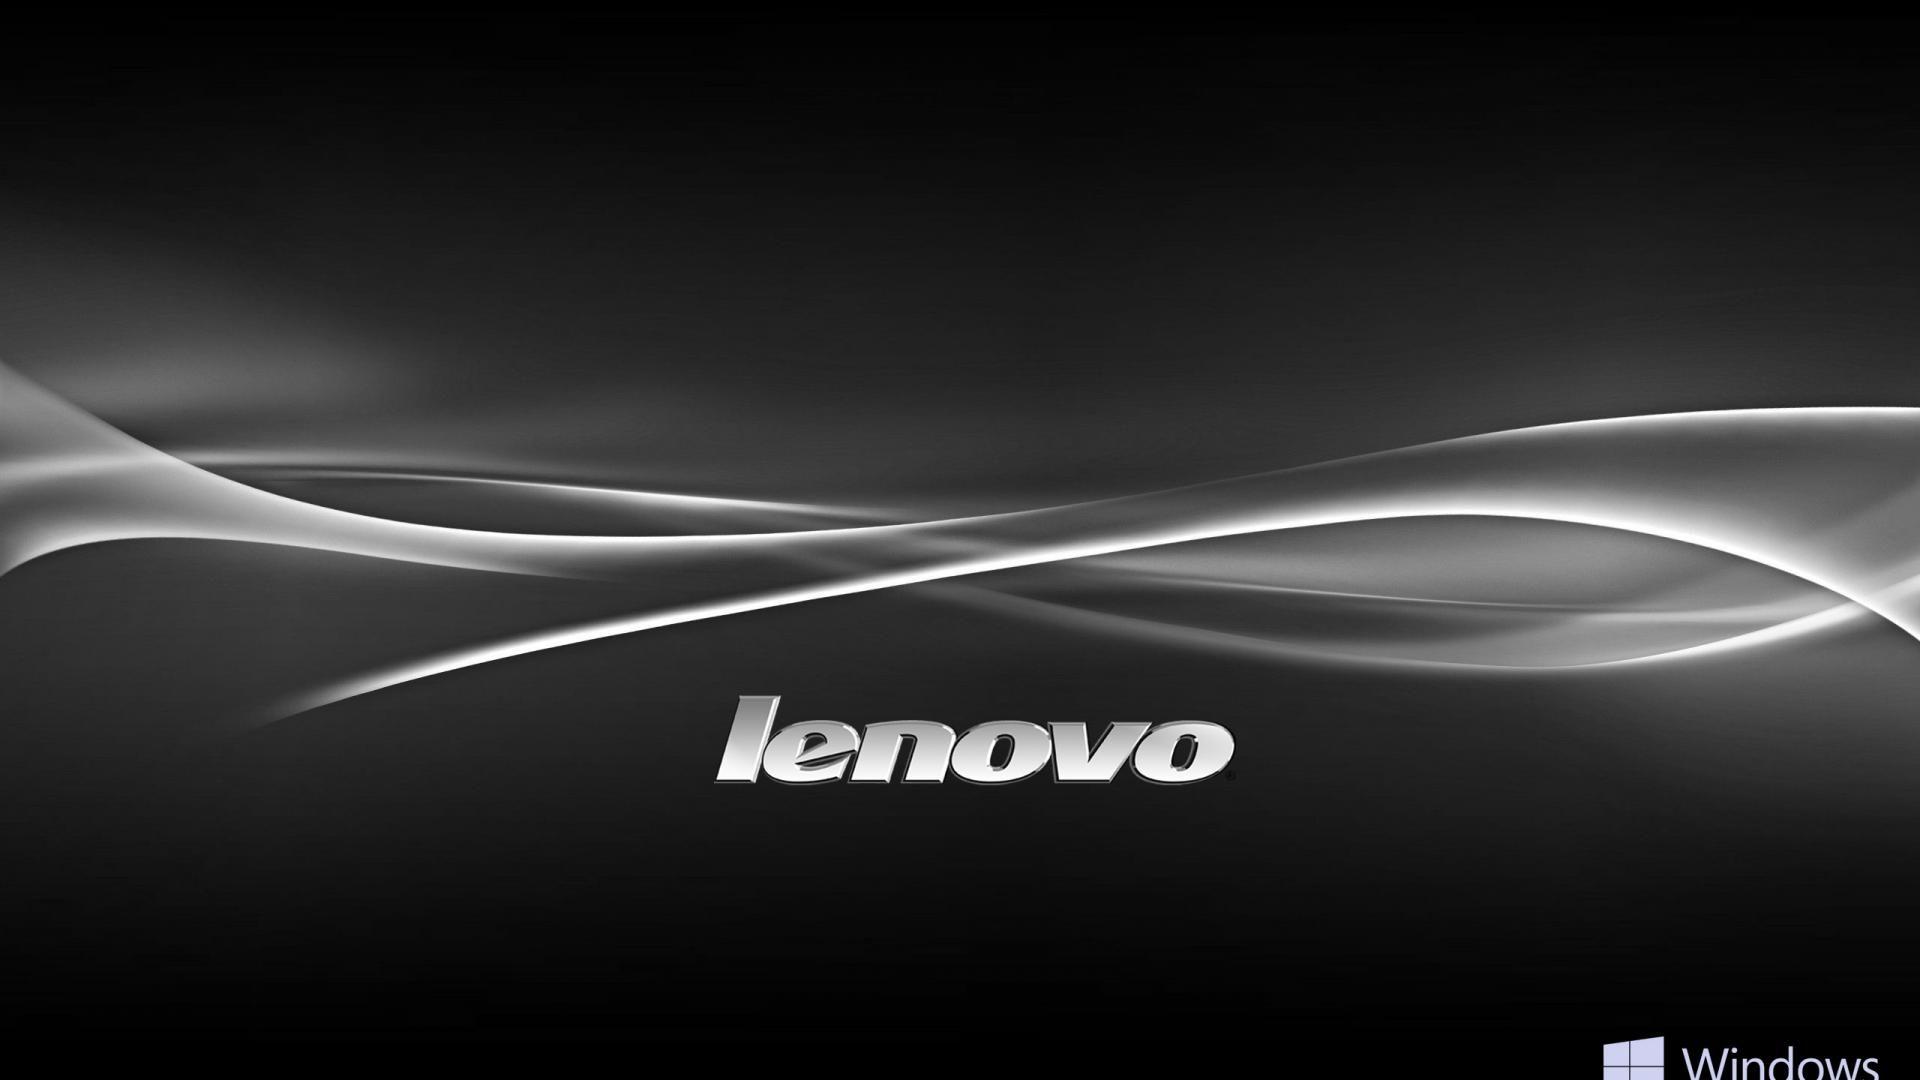 Lenovo Wallpapers HD - Wallpaper Cave Full Hd Wallpapers For Windows 8 1920x1080